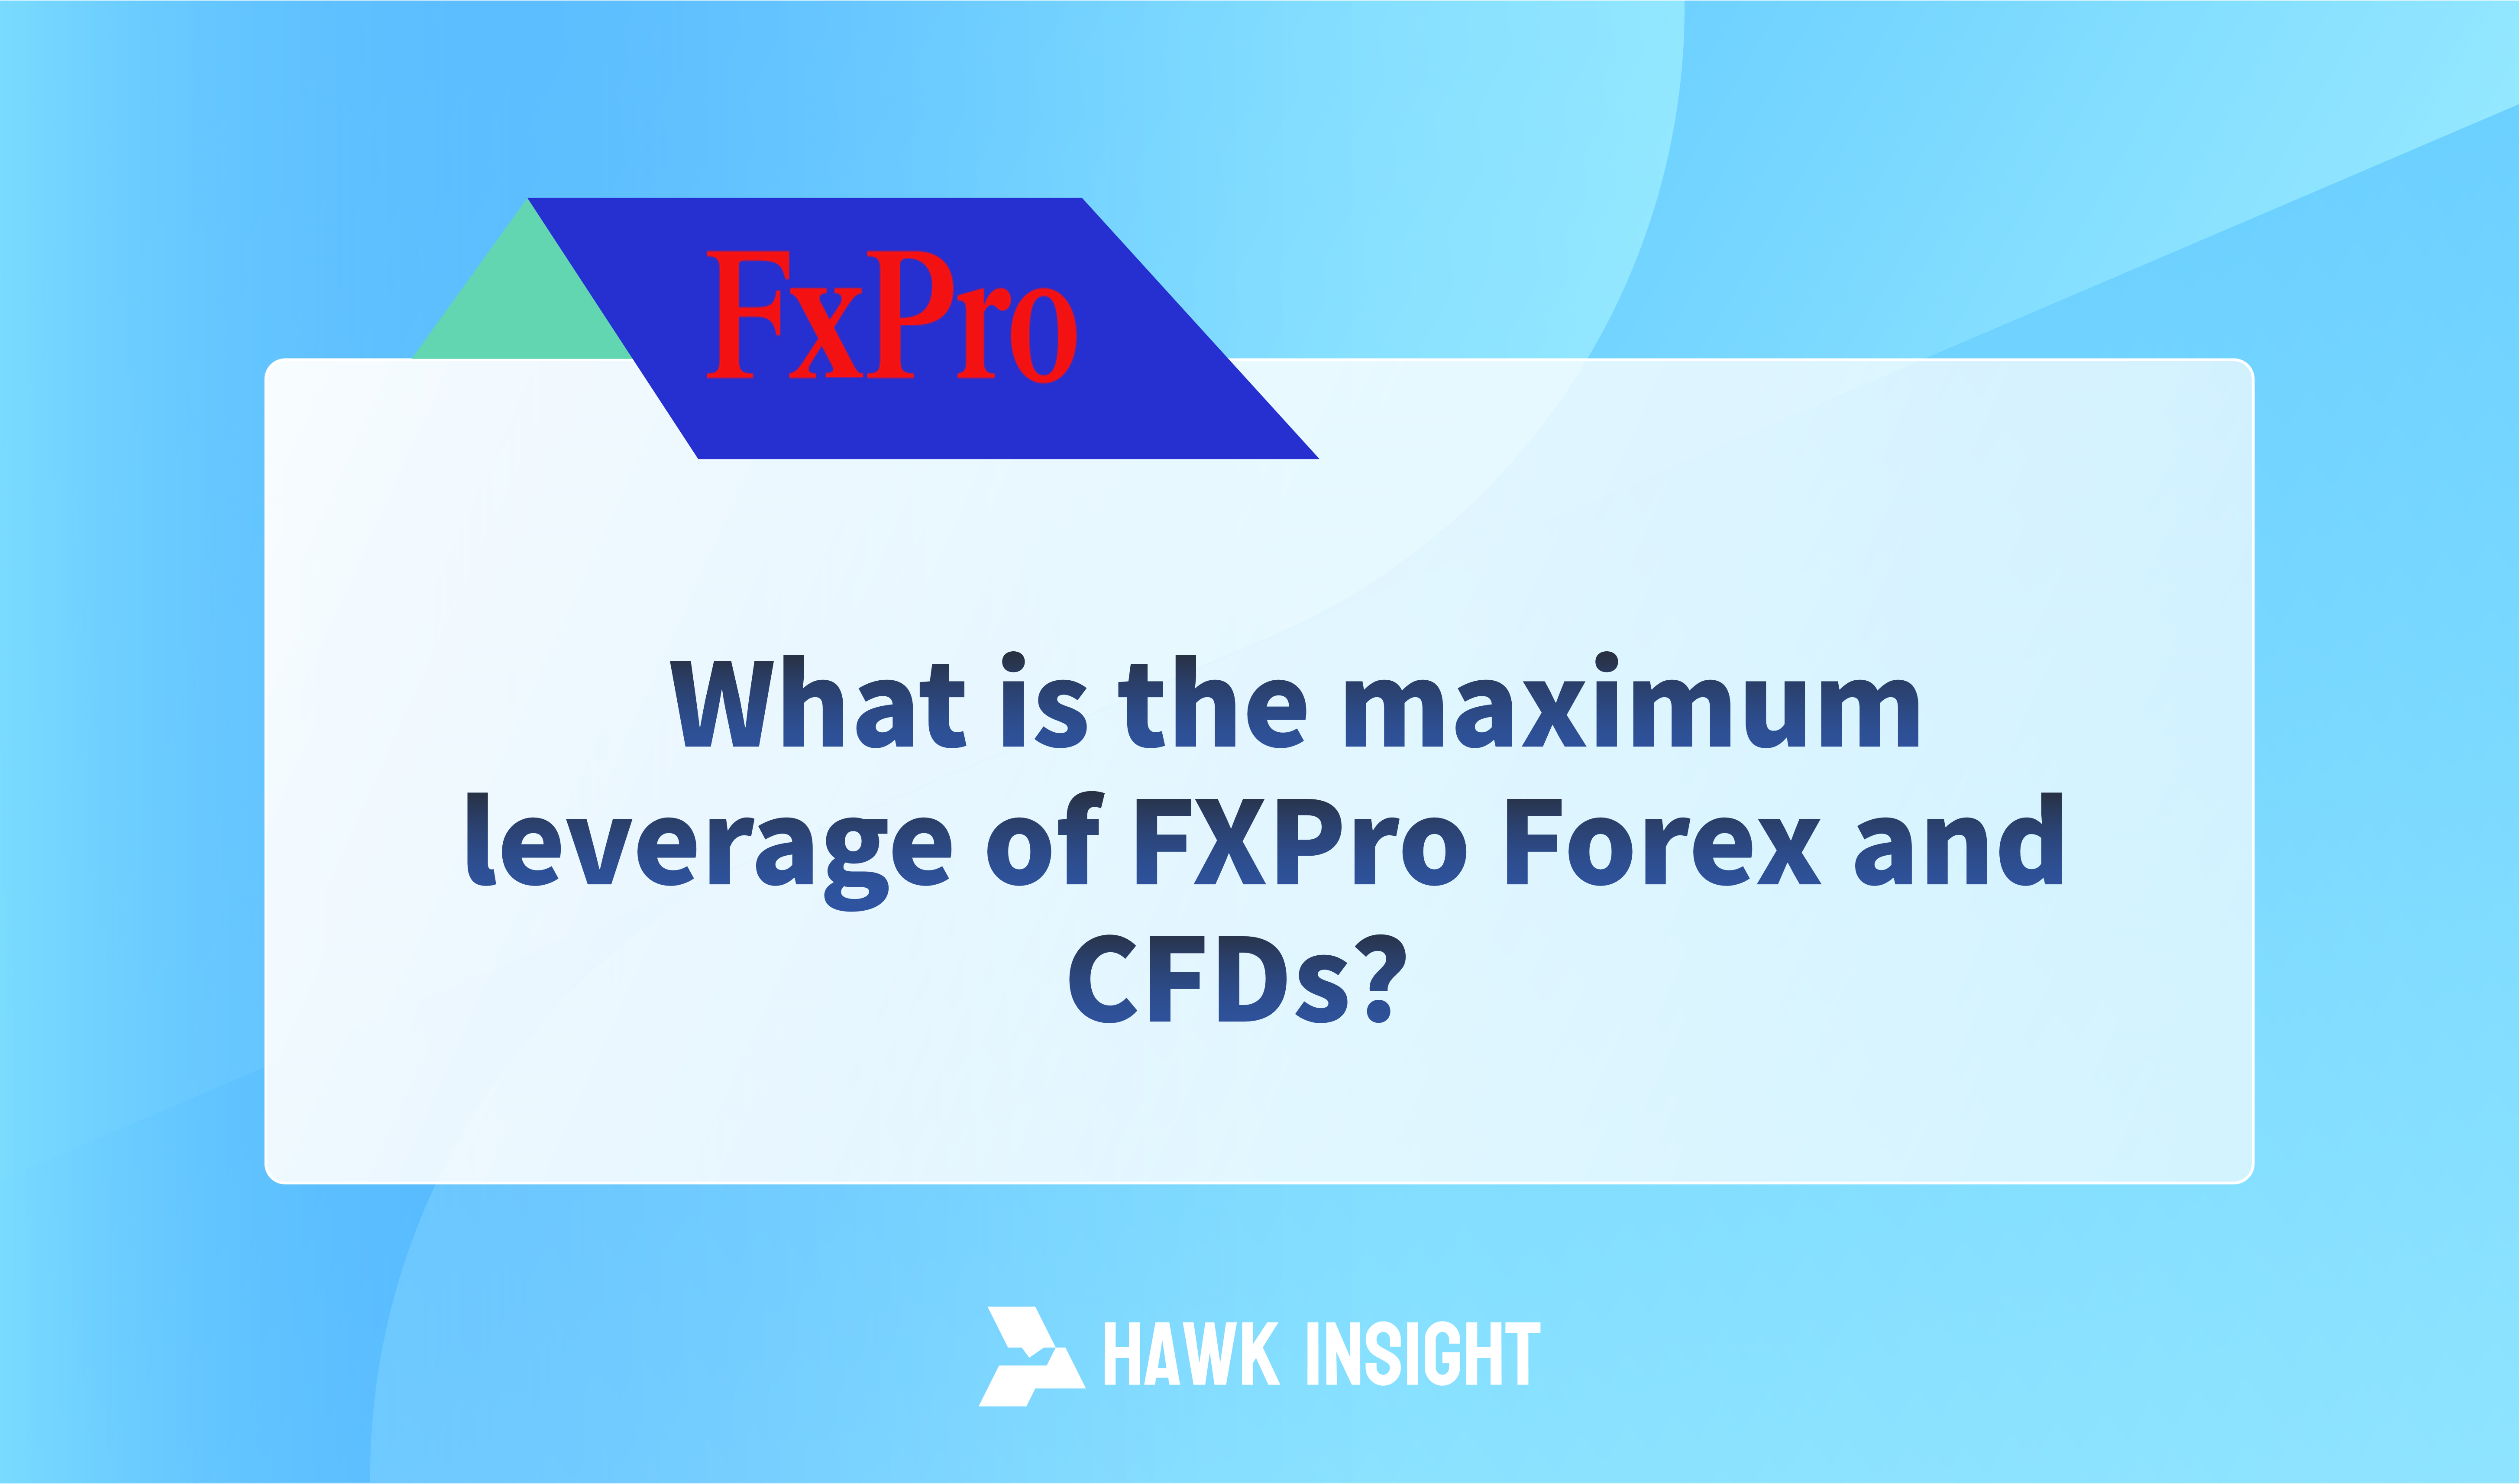 What is the maximum leverage of FXPro Forex and CFDs？